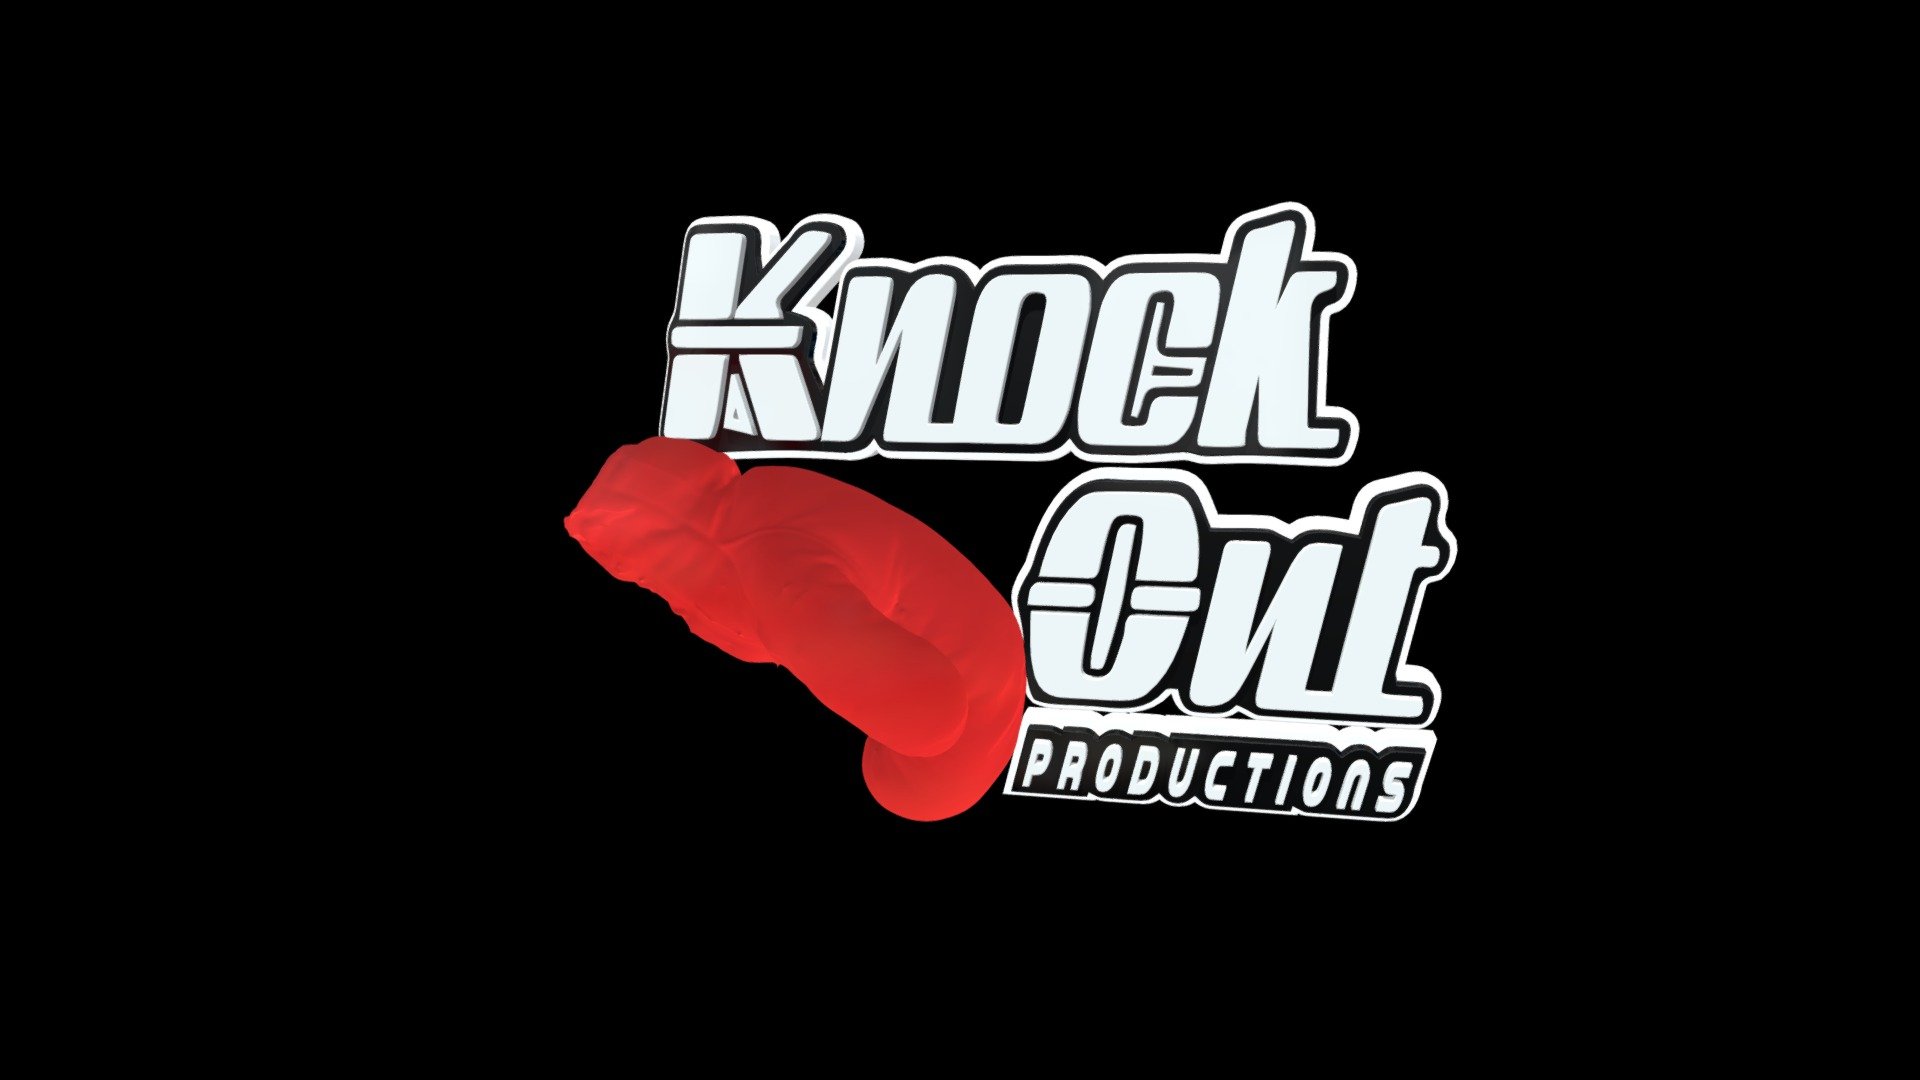 Knock Out Productions